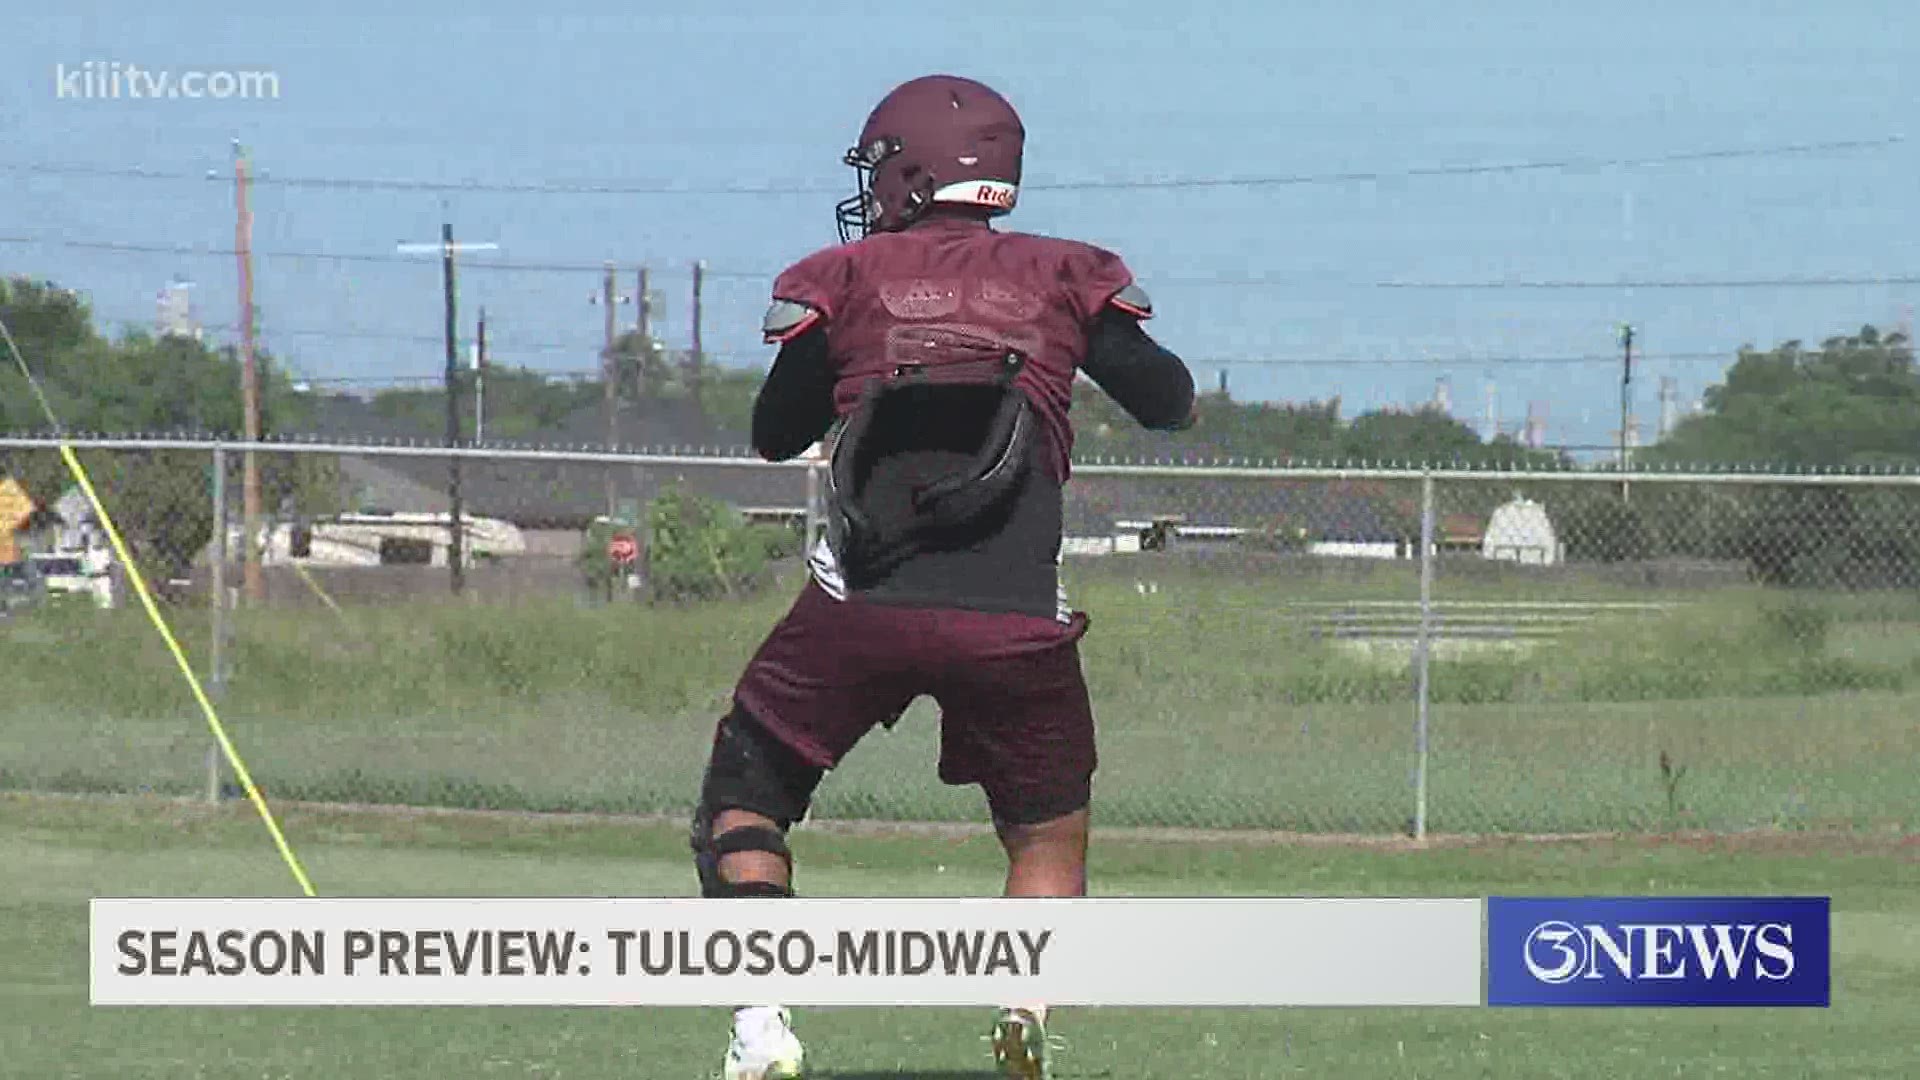 Tuloso-Midway is coming off a season where the football program showed signs of heading in the right direction, doubling it's win total from 2018.